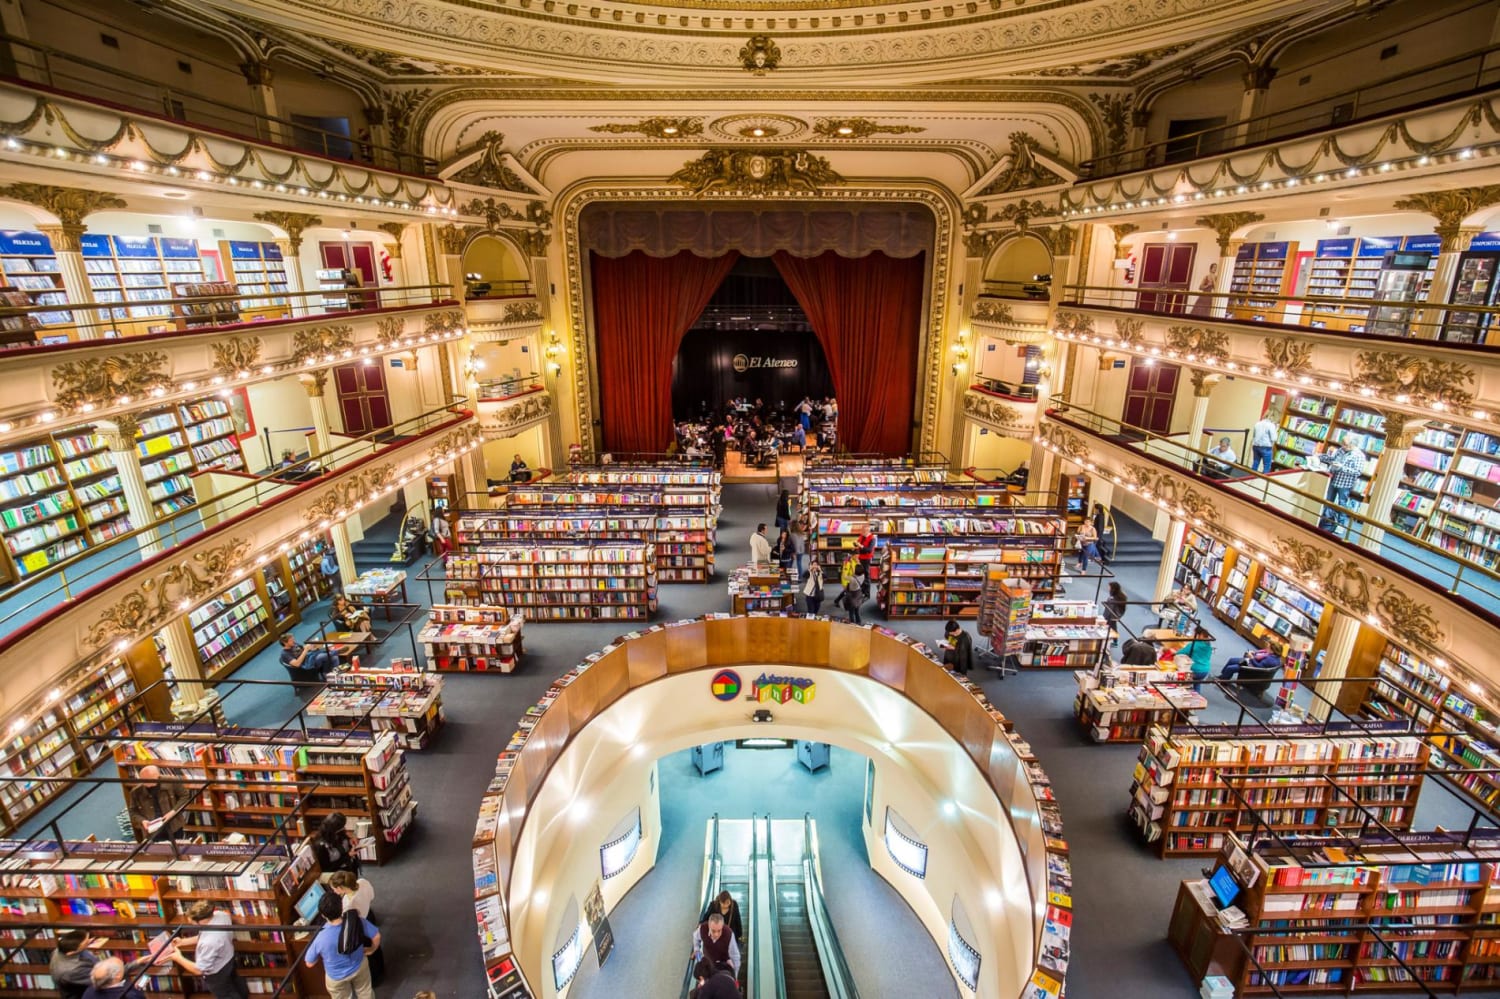 This is the world's most beautiful bookstore